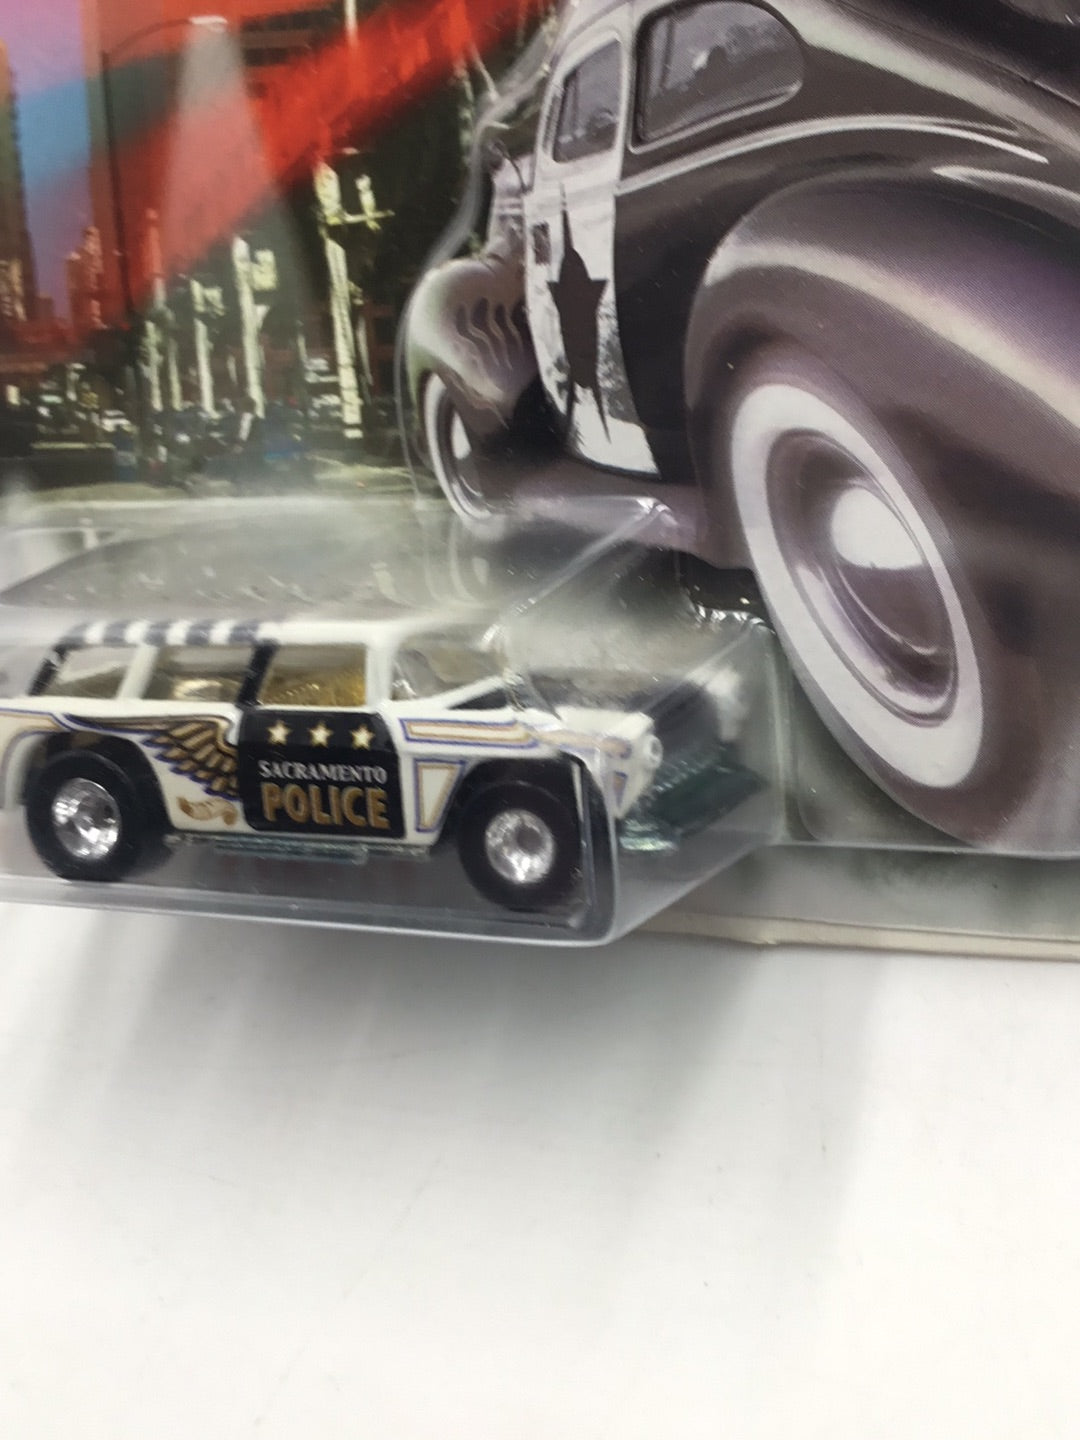 Hot wheels Cop Rods series 2  Chevy Nomad NN3